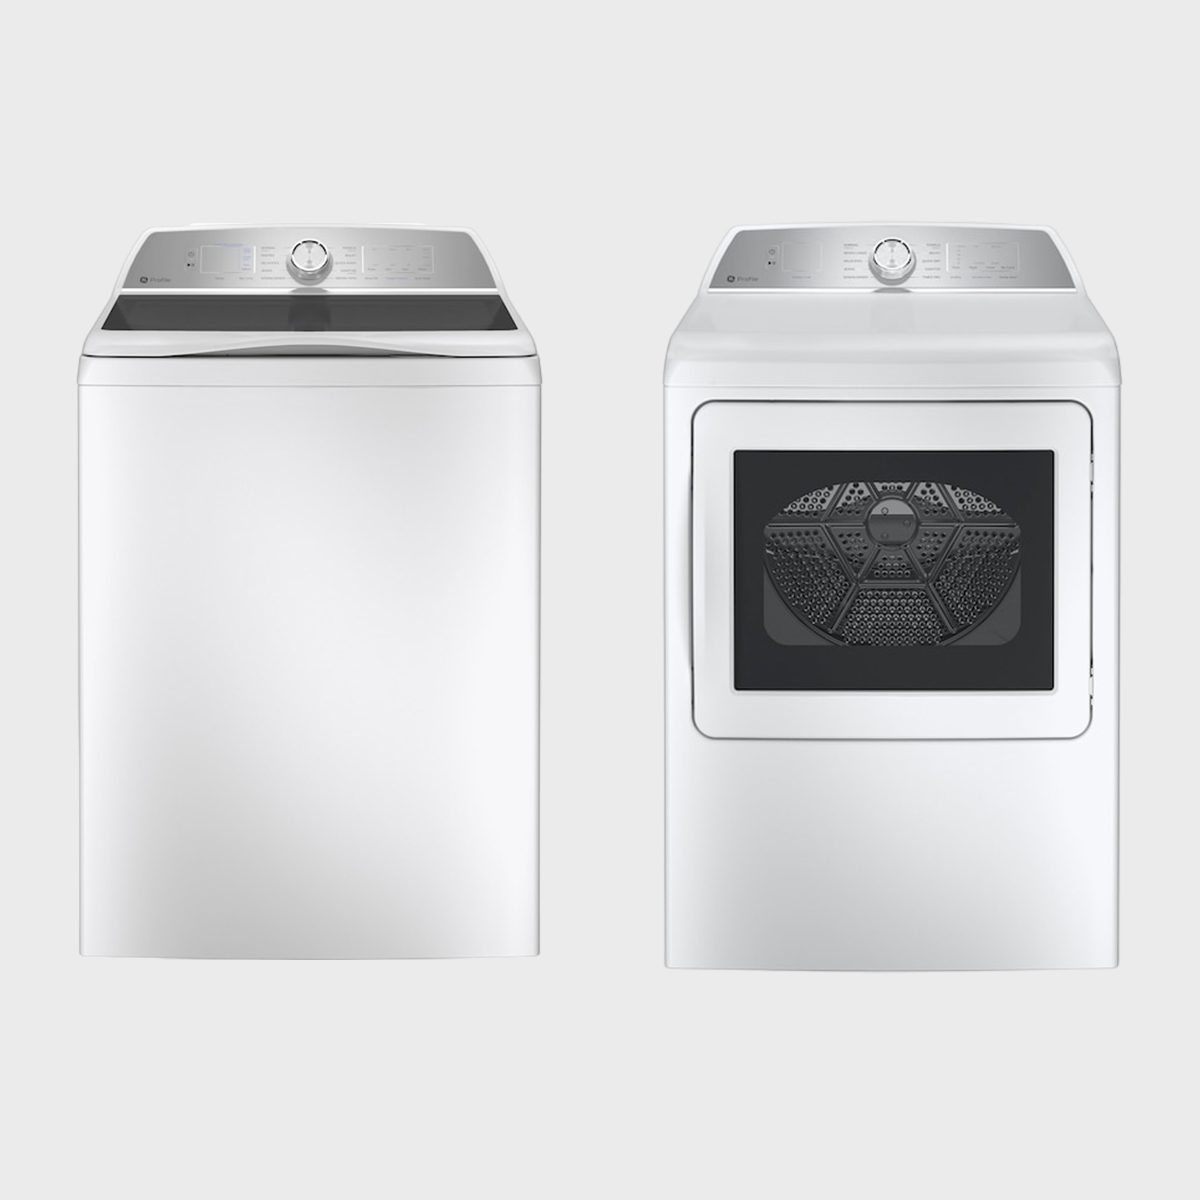 https://www.rd.com/wp-content/uploads/2022/02/GE-Profile-High-Efficiency-Top-Load-Washing-Machine-with-FlexDispense-and-Electric-Vented-Dryer_ecmm_via-lowes.com_.jpg?fit=700%2C700